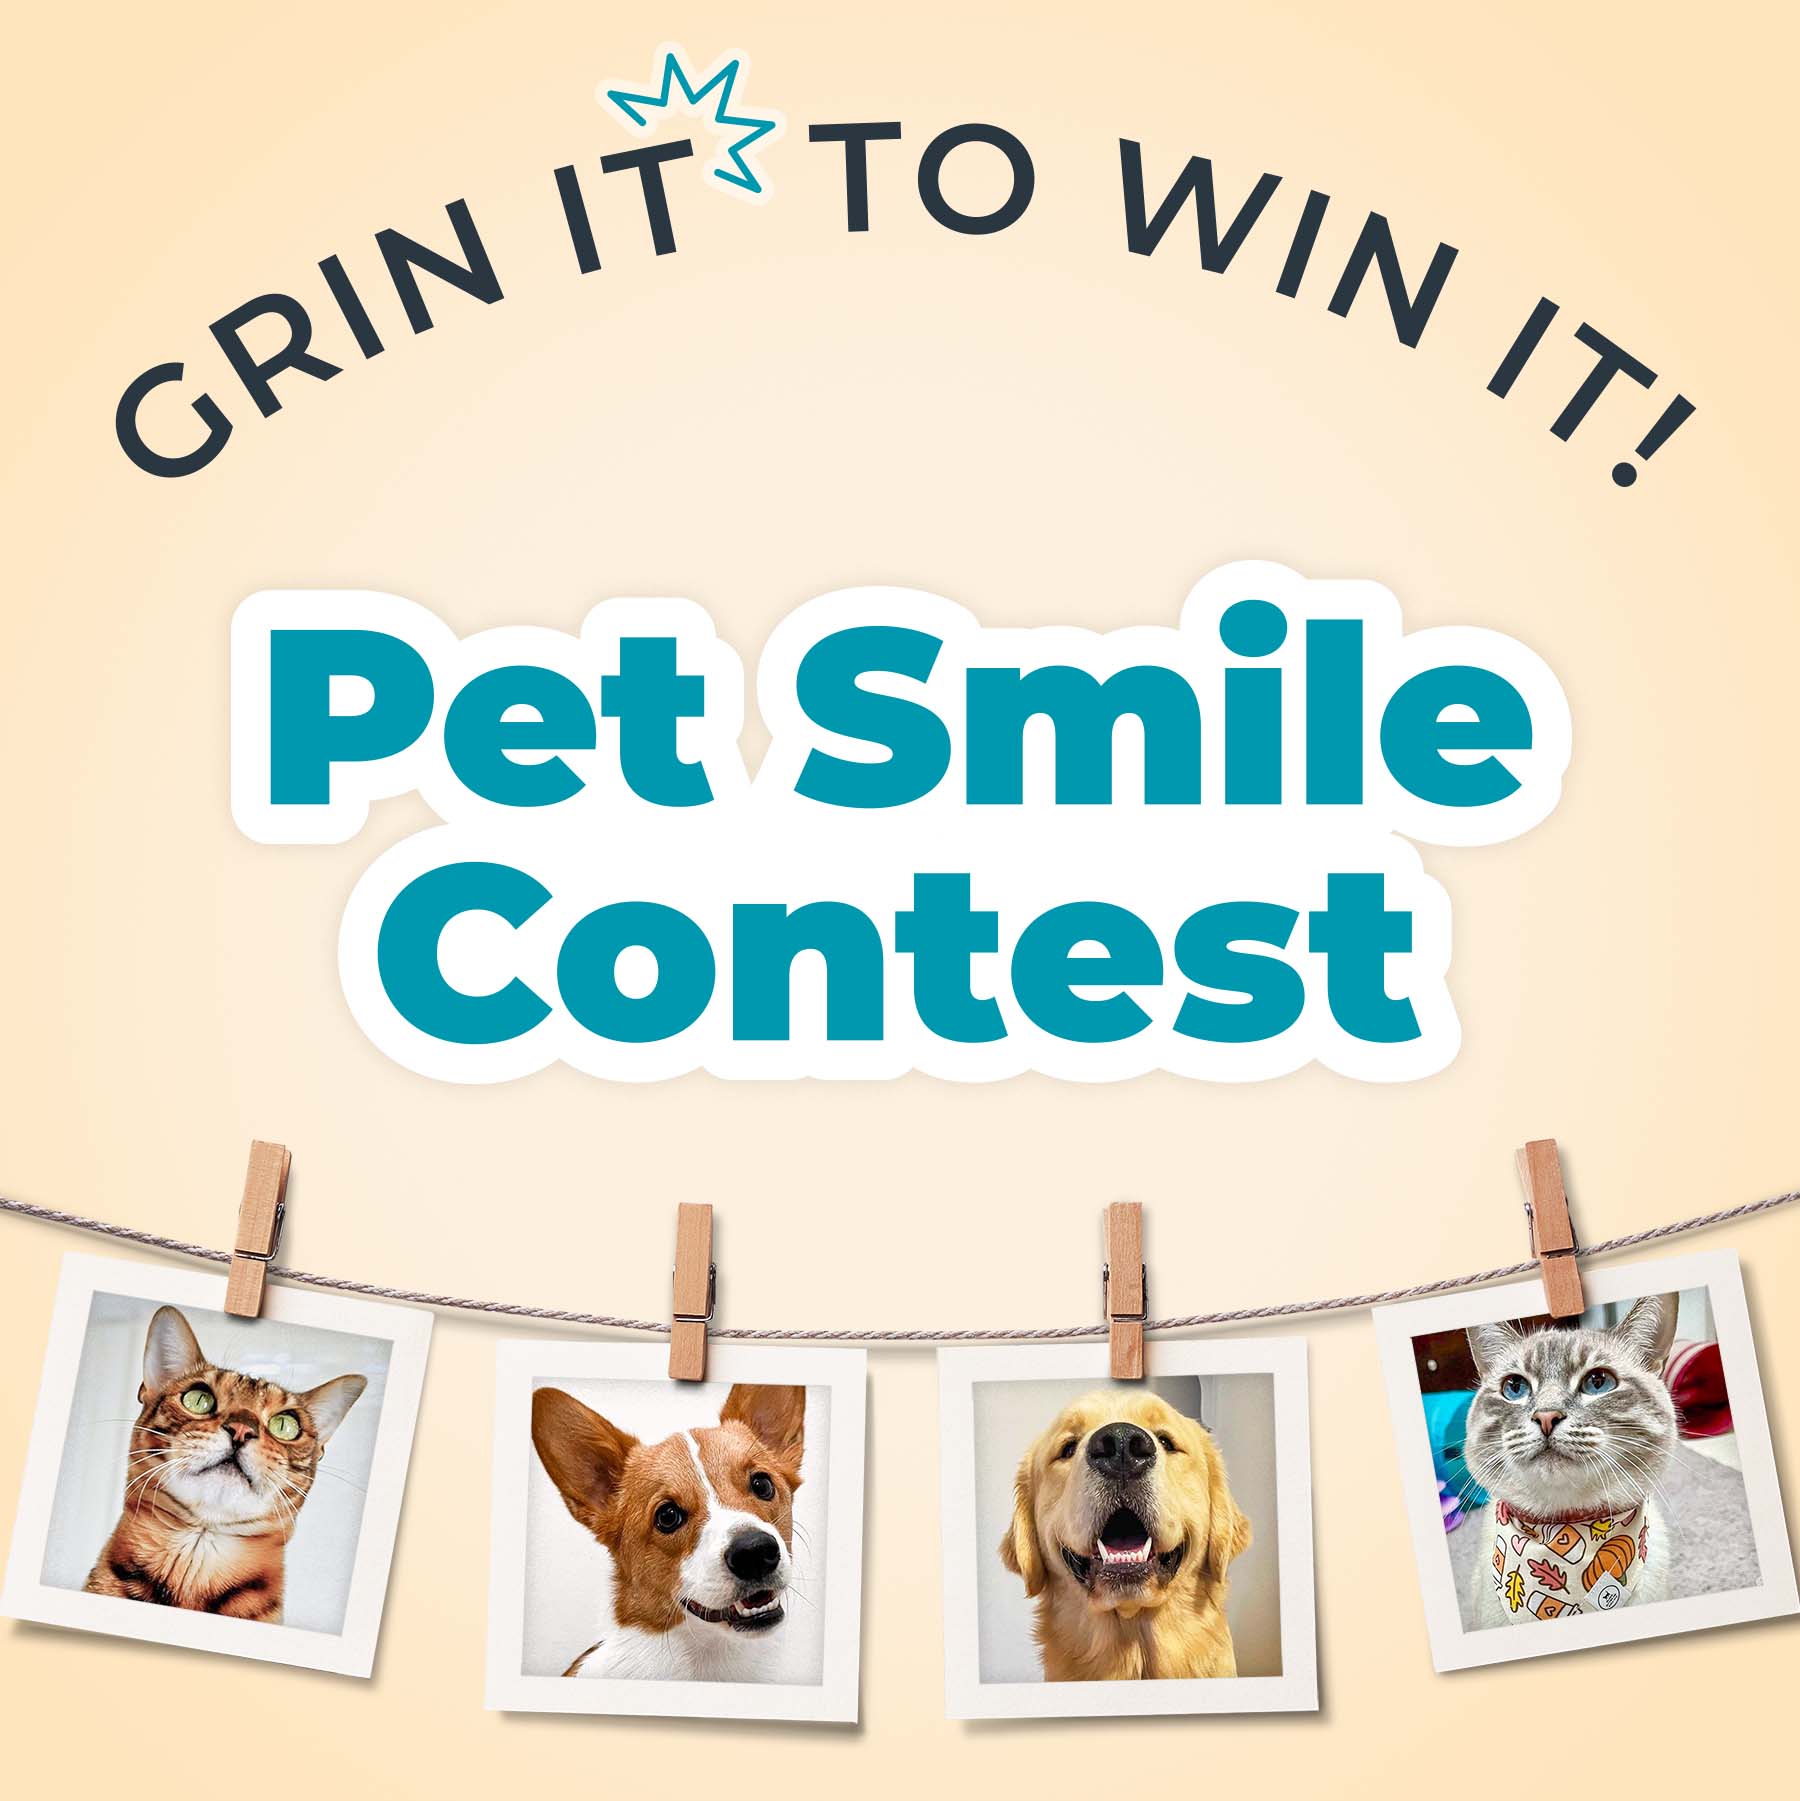 grin-to-win-pet-smile-contest